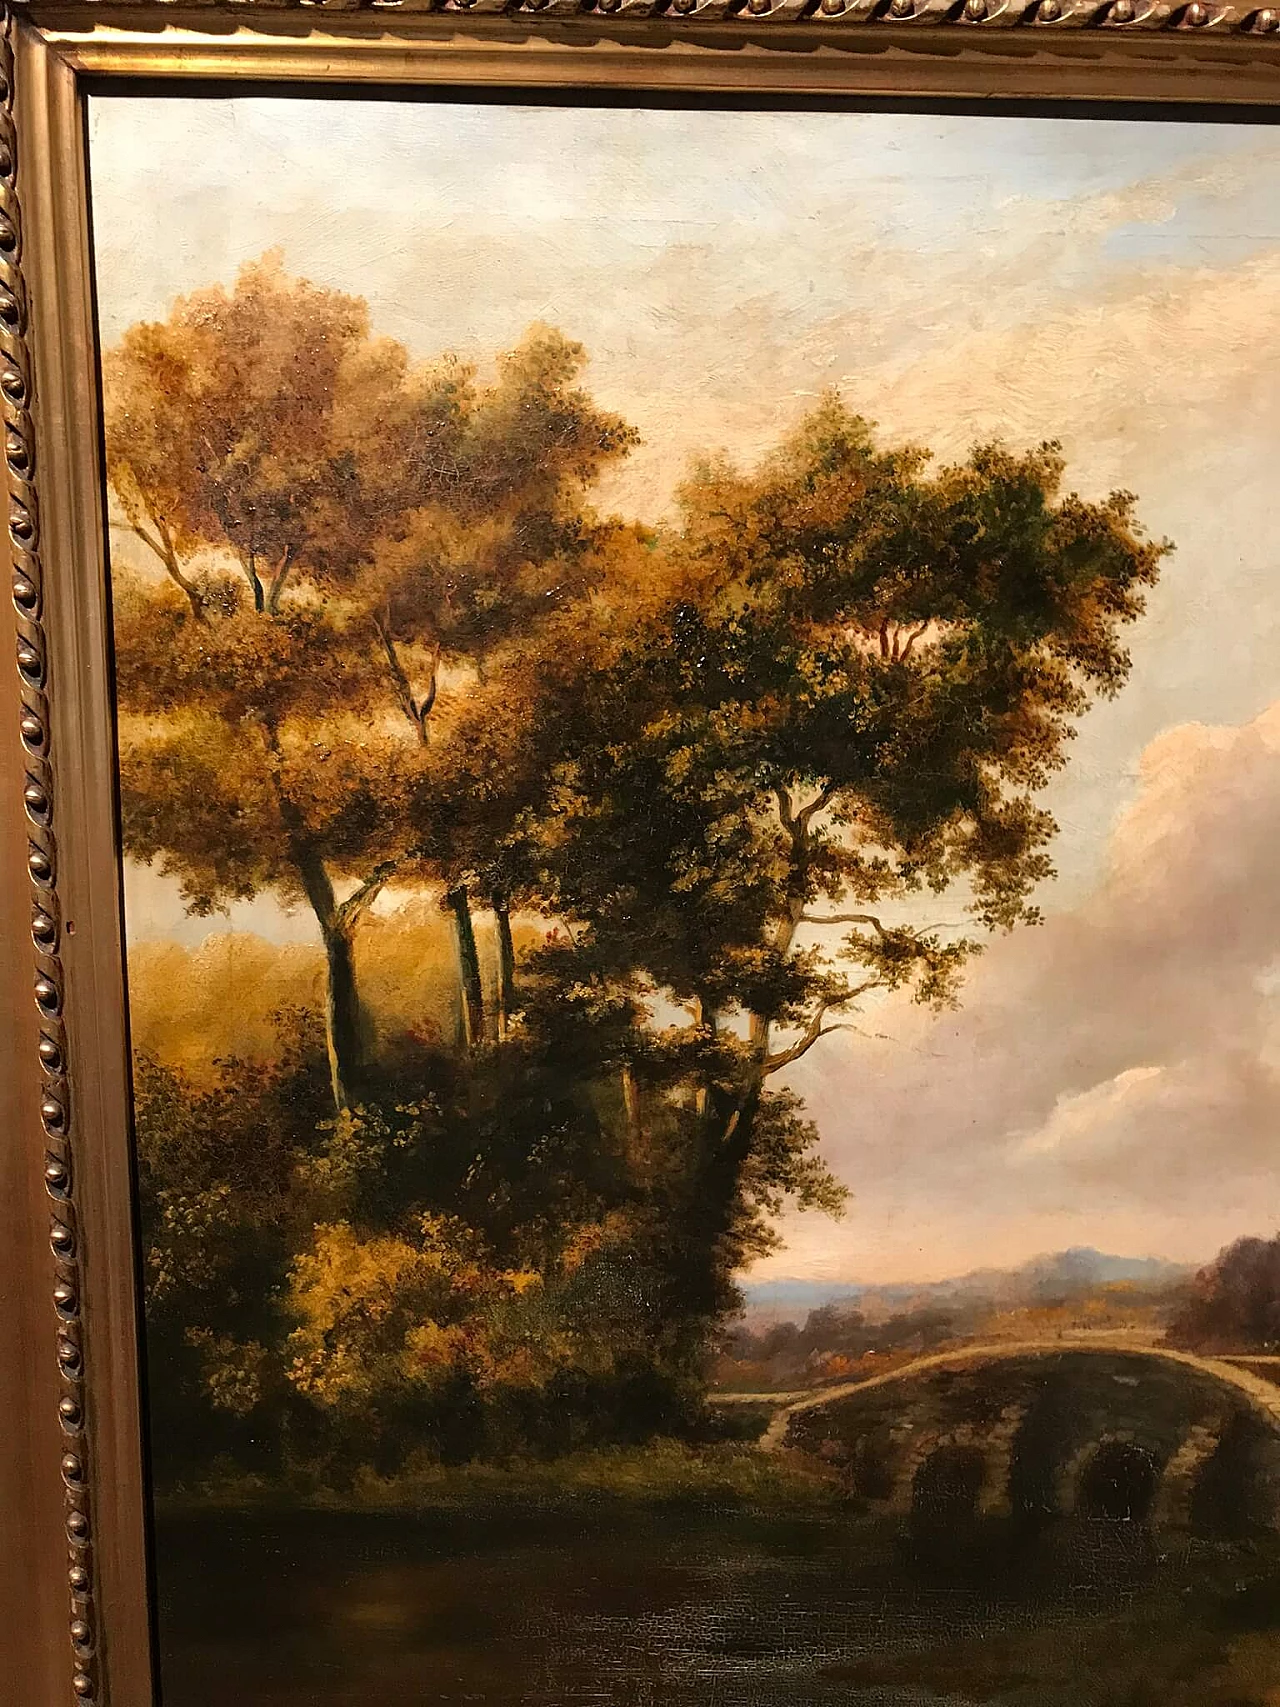 Oil painting on canvas with bucolic landscape, '800 1175912